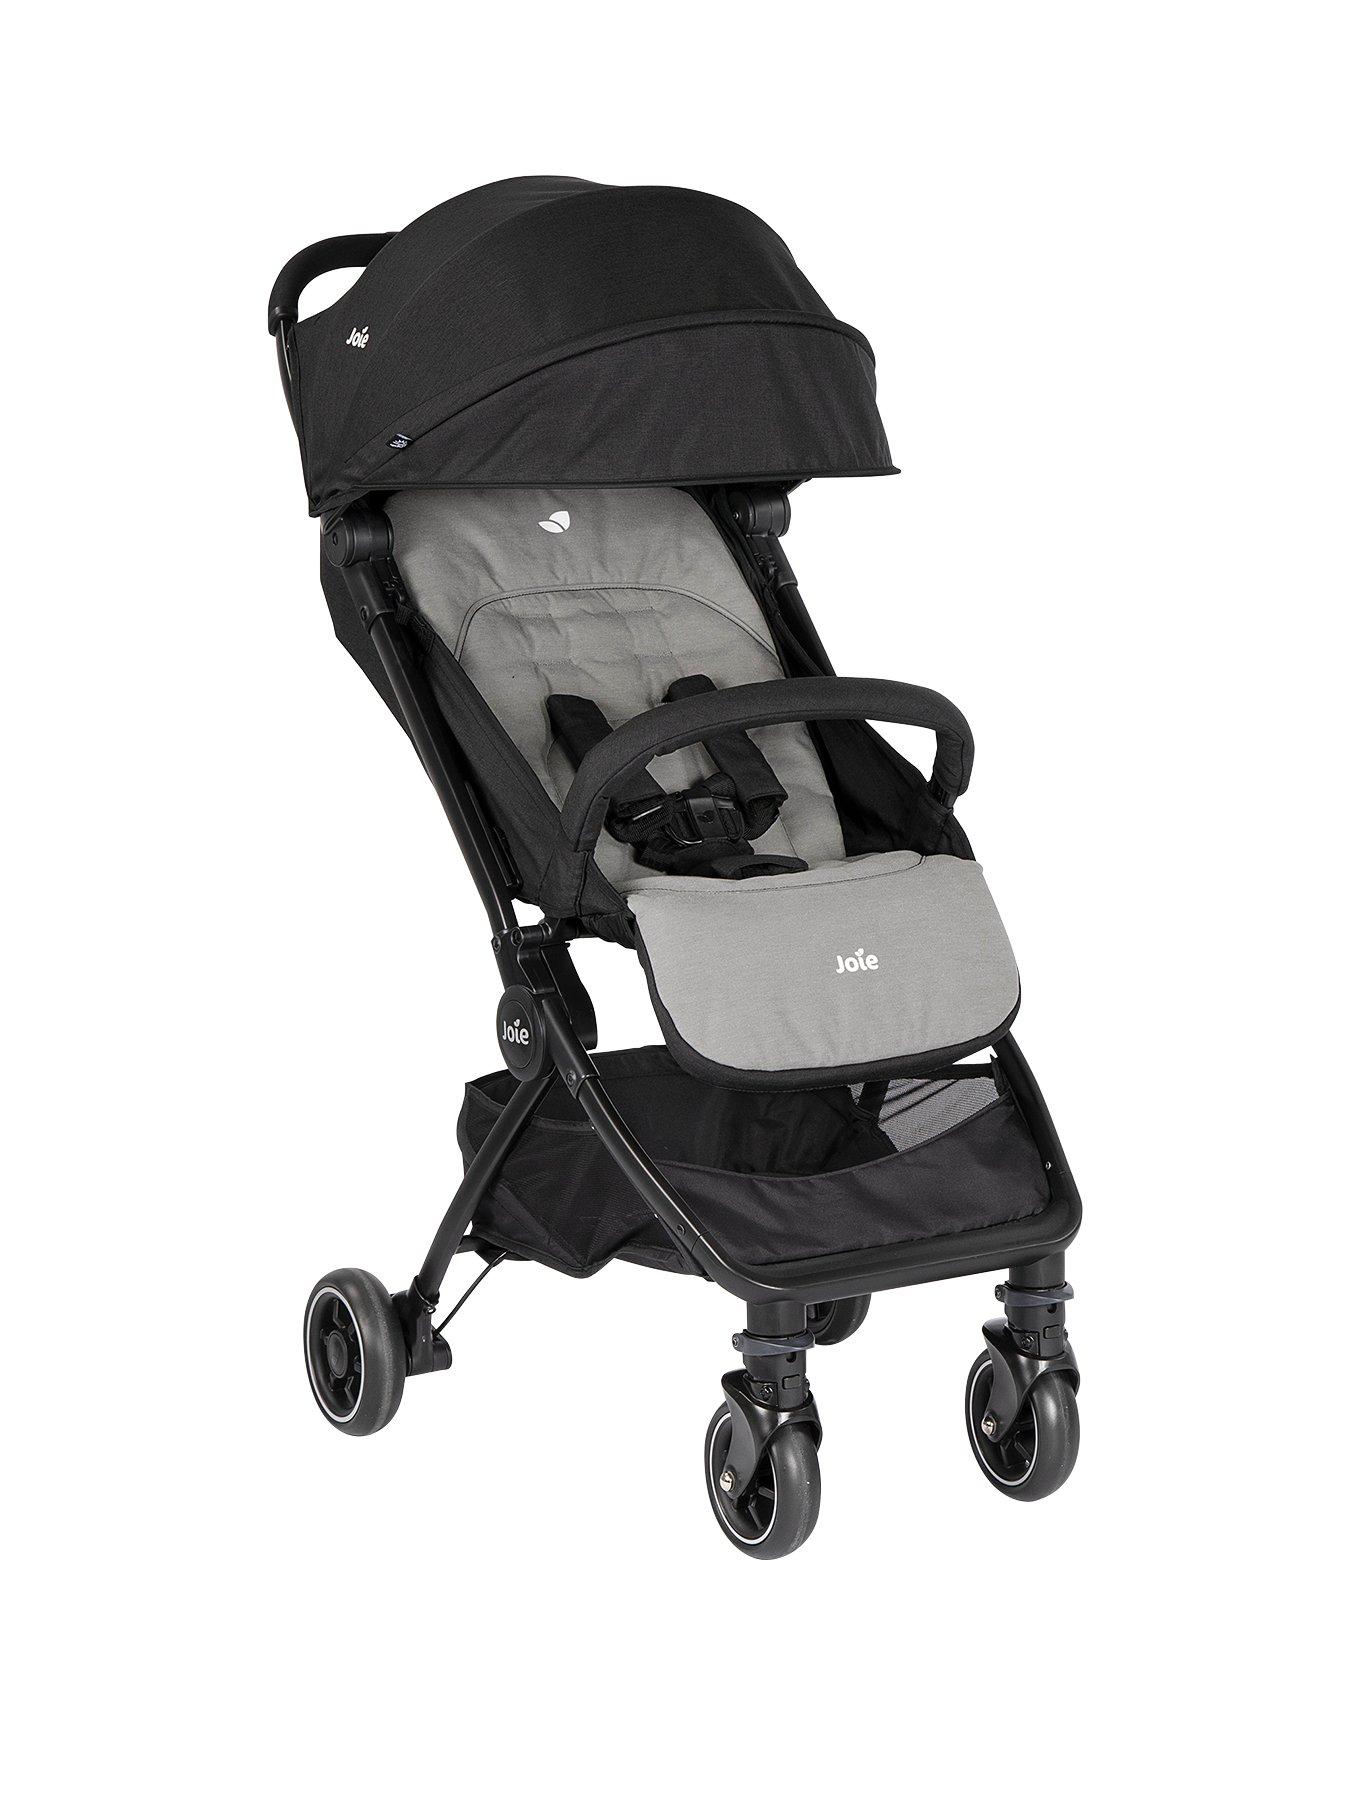 pushchair with large hood